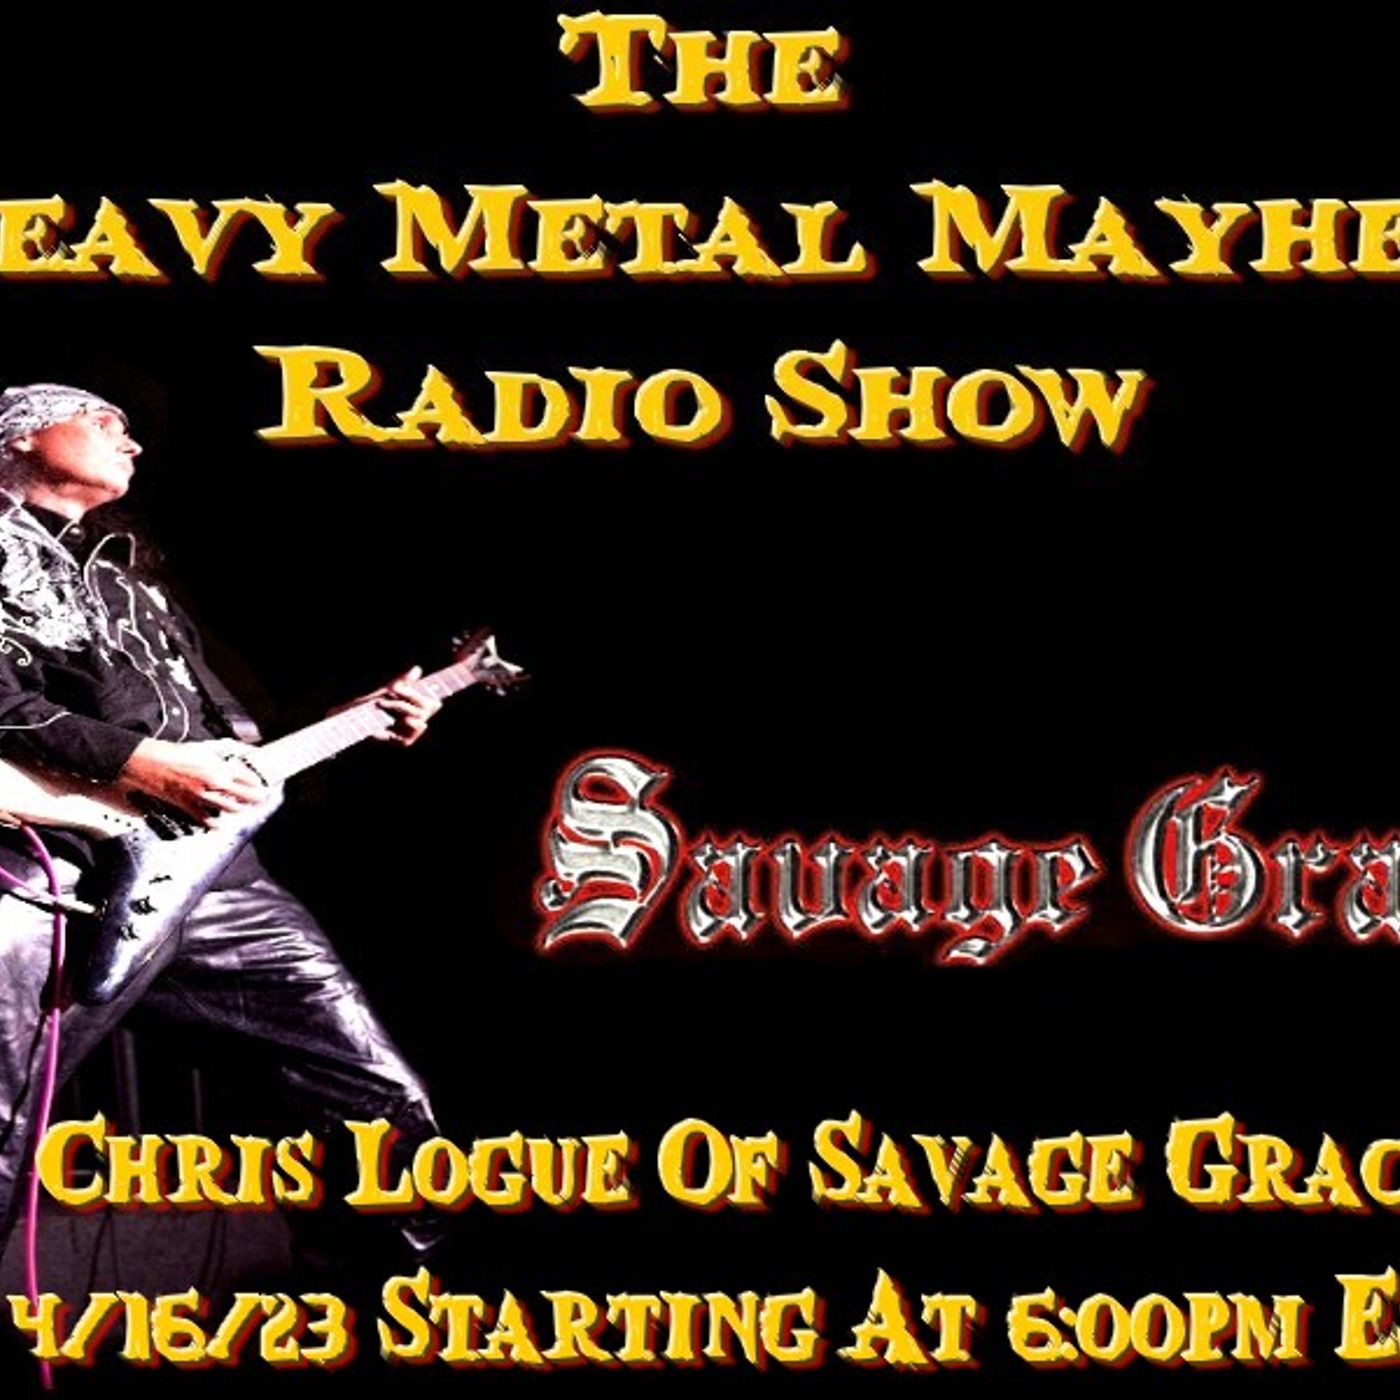 Guest Chris Logue Of Savage Grace & Dave Hughart And Bill Simmons Of The Wrath 4/16/23